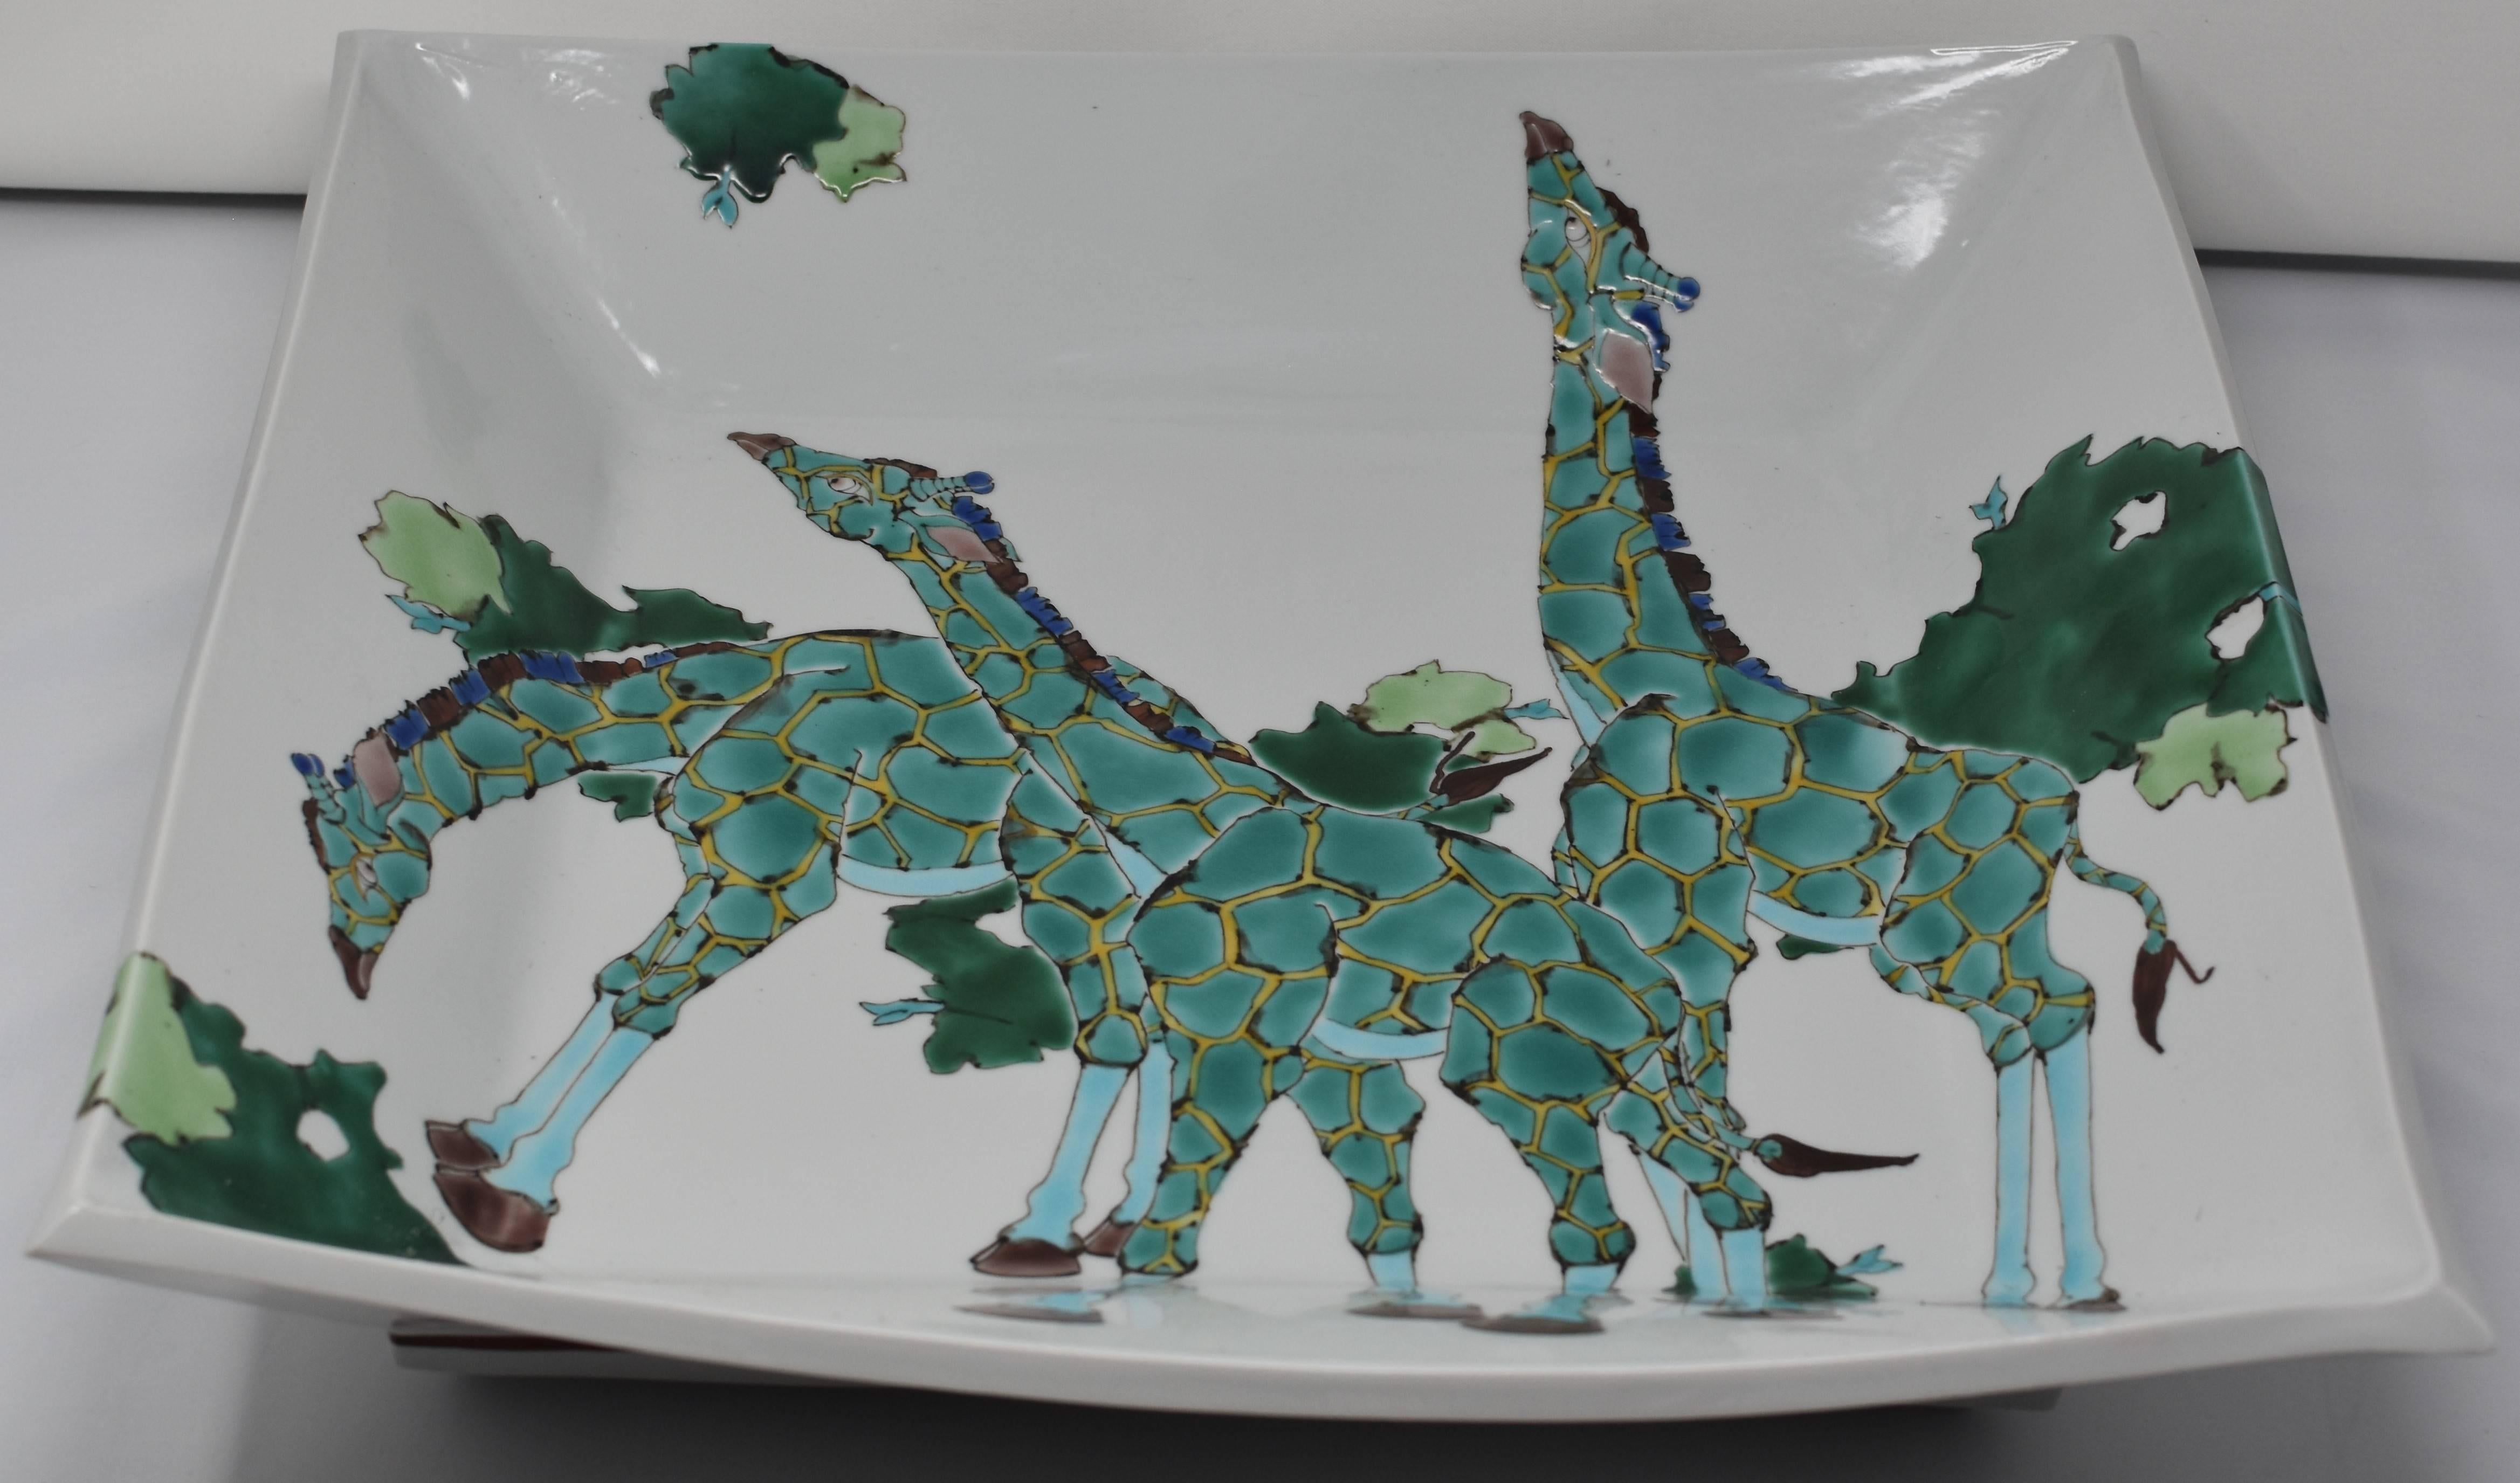 Unique contemporary large Japanese Kutani hand-painted porcelain square-shaped deep charger with a unique interpretation of giraffes in green. This is part of a series of pieces featuring the animals of the African savannah. Depicted here are